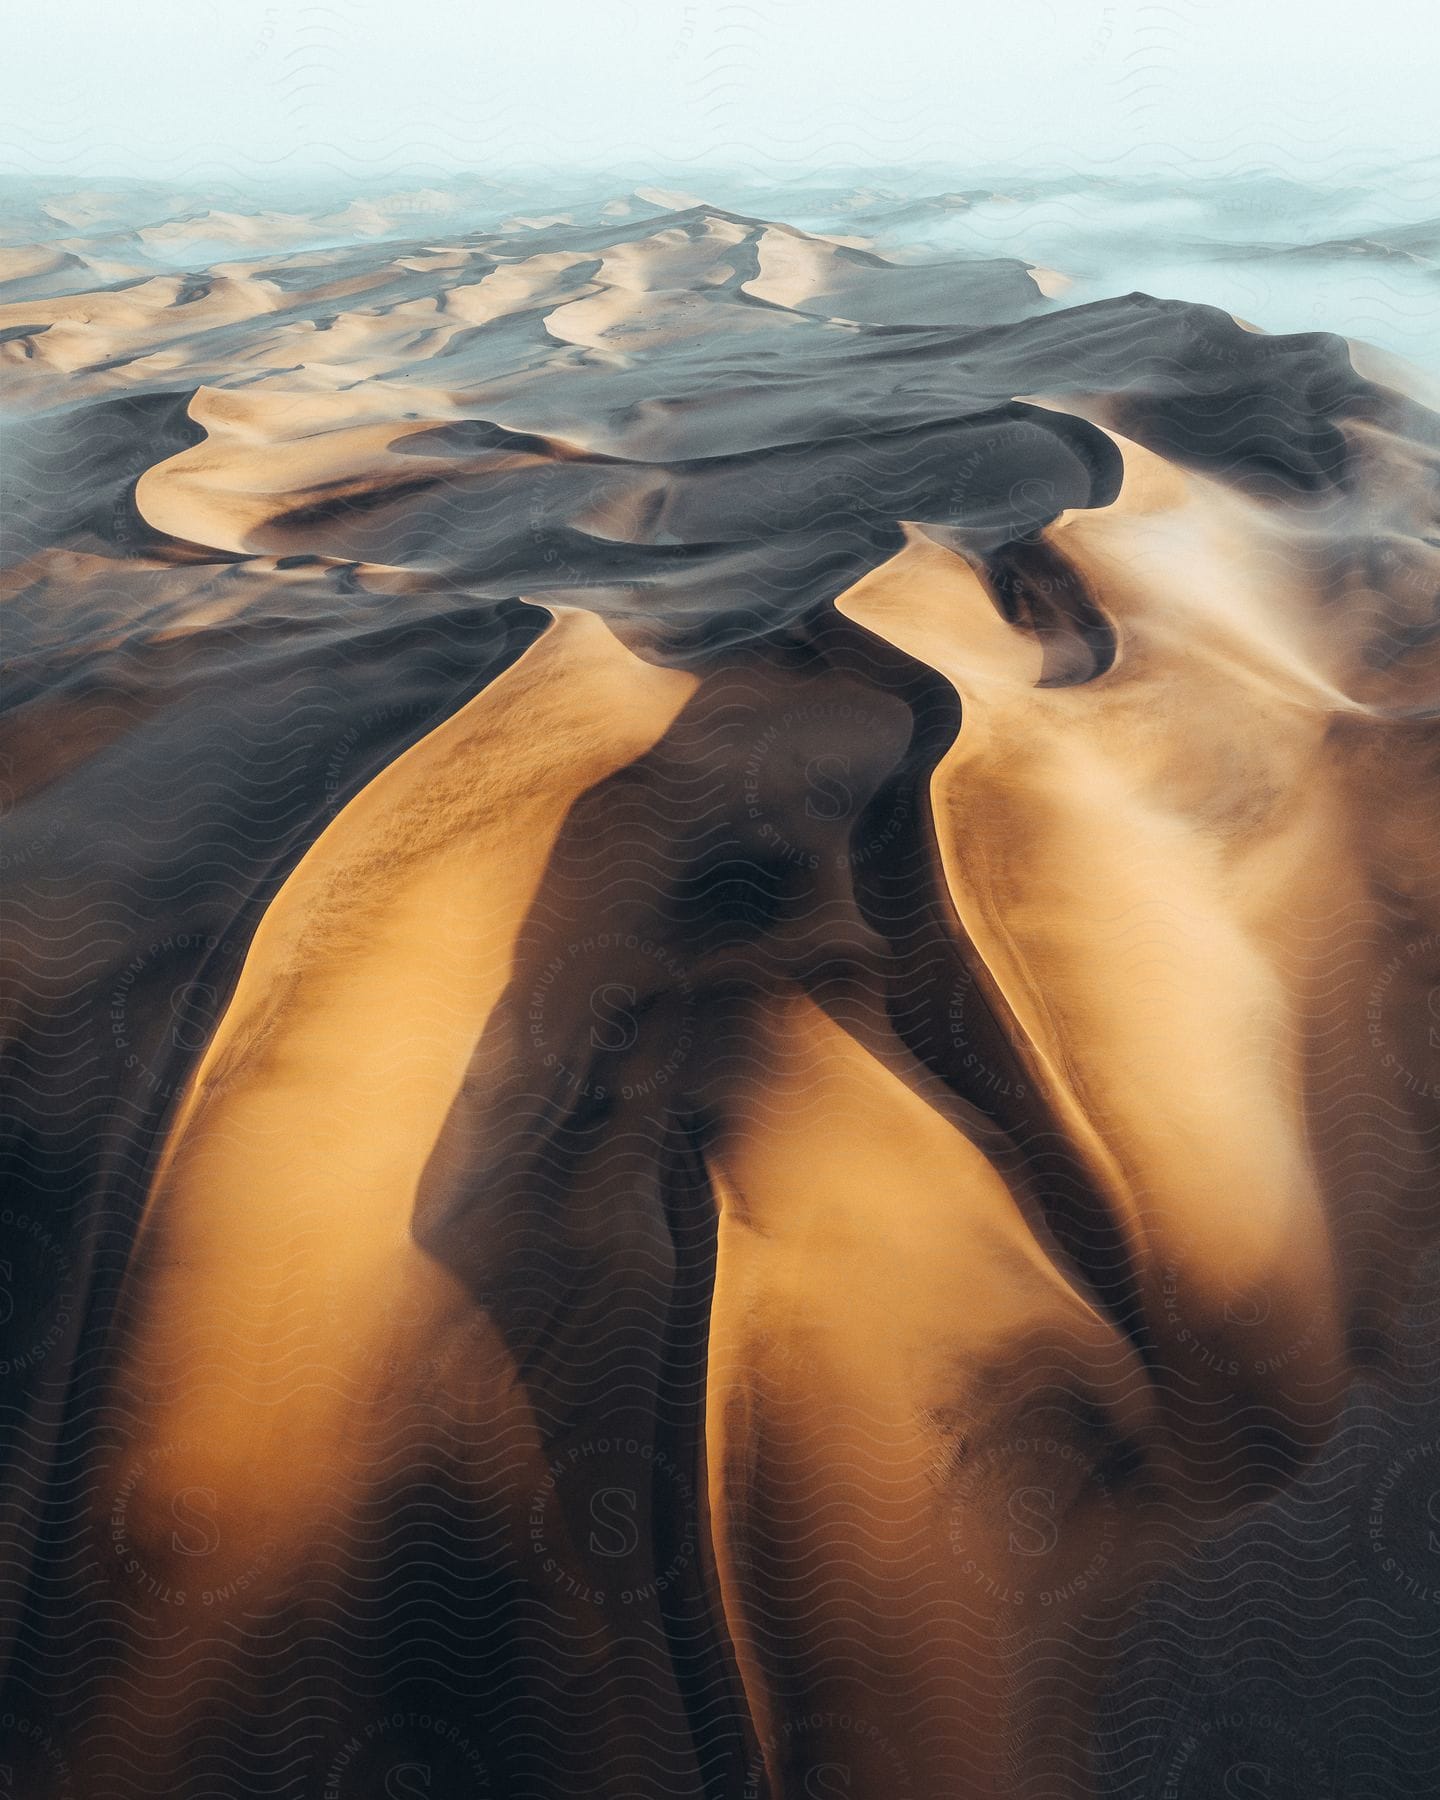 A barren desert landscape with sand dunes in namibia